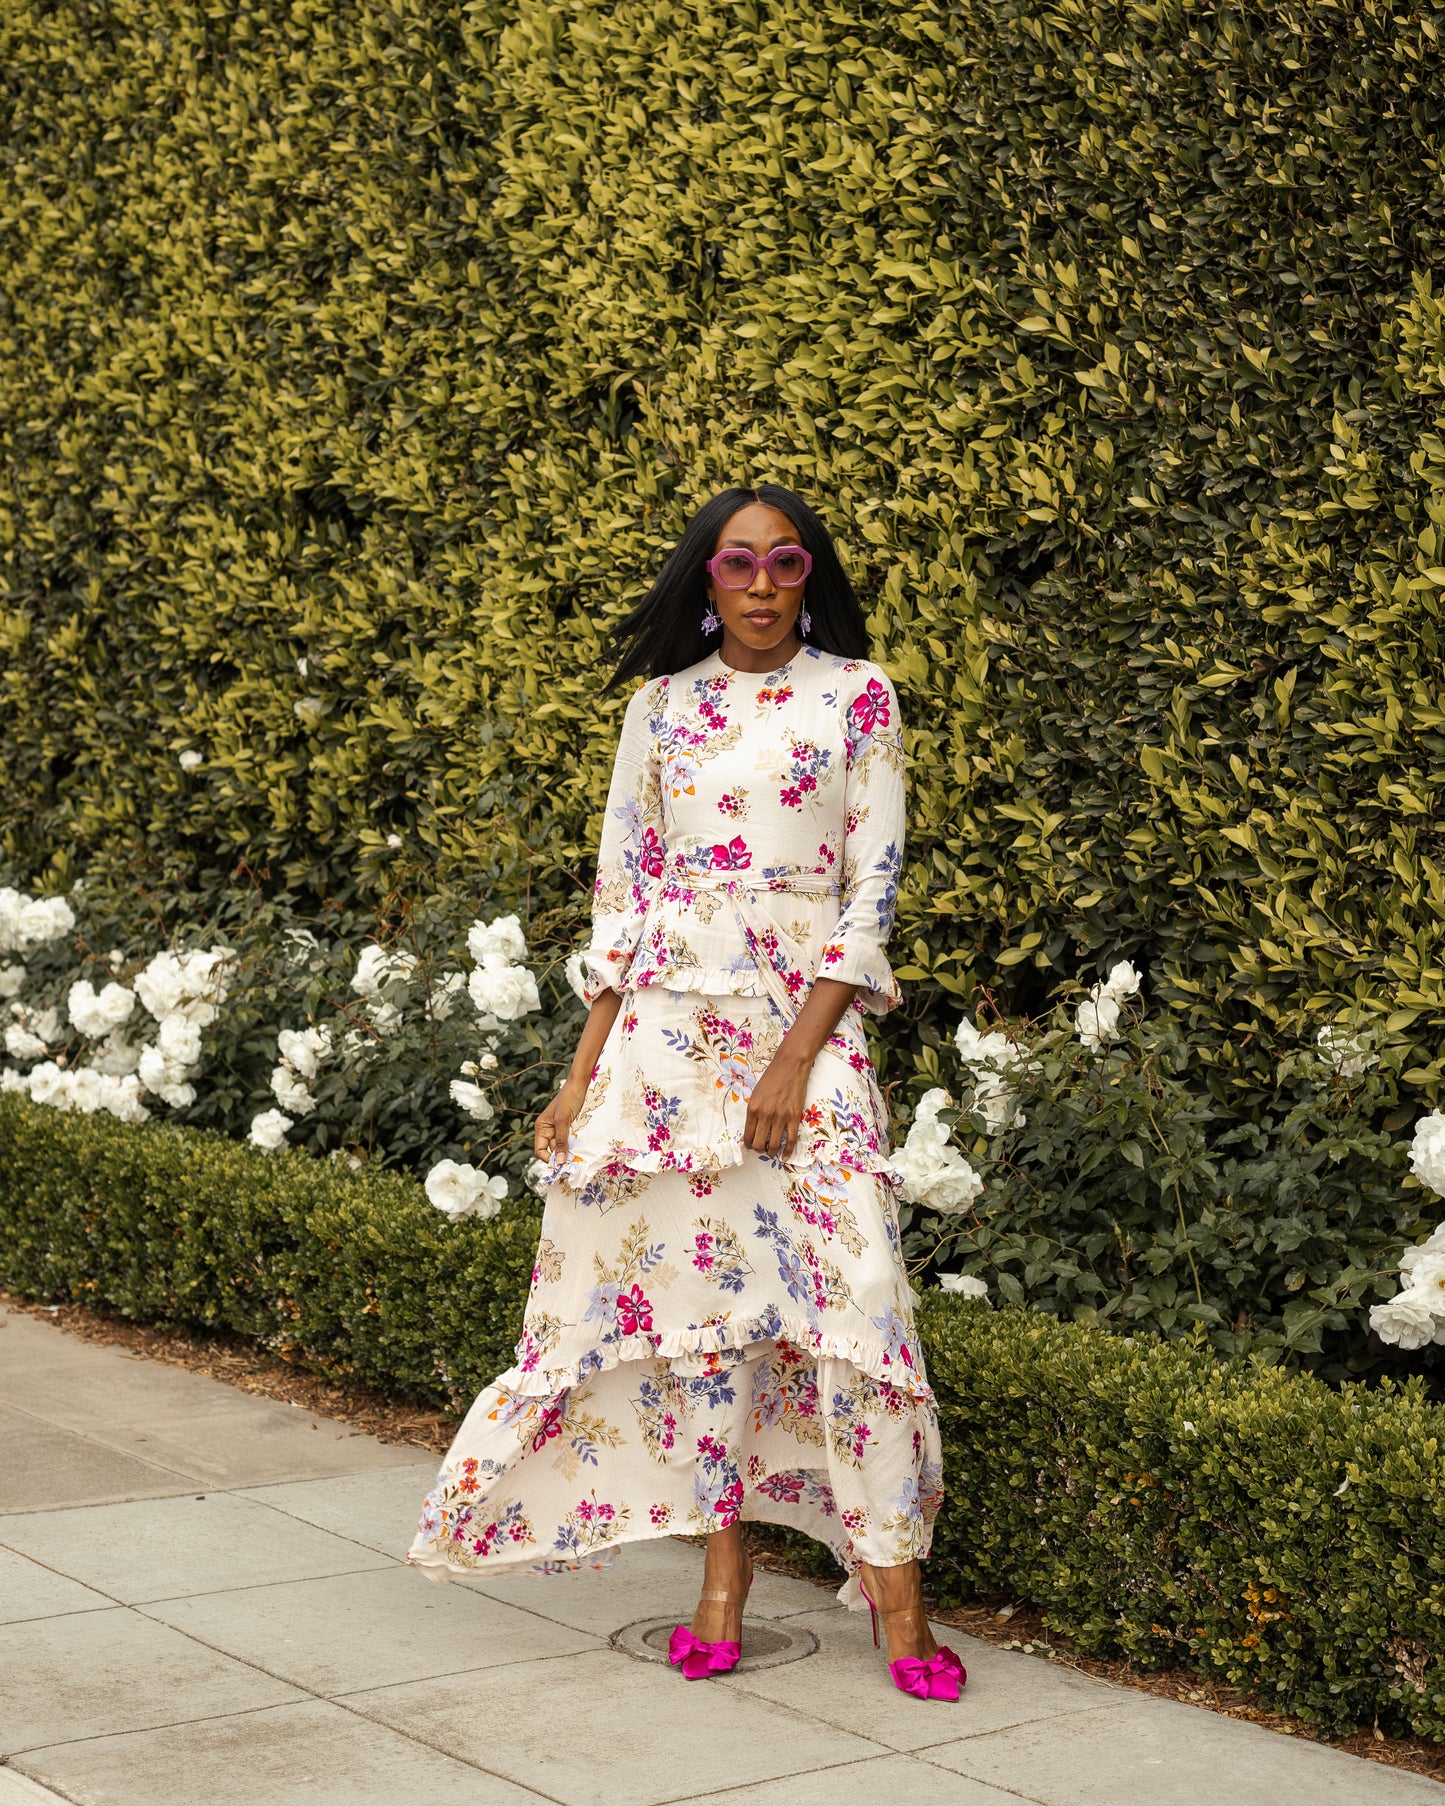 A floral maxi dress made from a soft, linen like crepe, it features high neck, bishop sleeves, tiered ruffle skirt and matching sash for a cinched waist. It's light, airy silhouette. Base color is pale yellow with a mixture of fuchsia, orange, and blue flowers as the print.